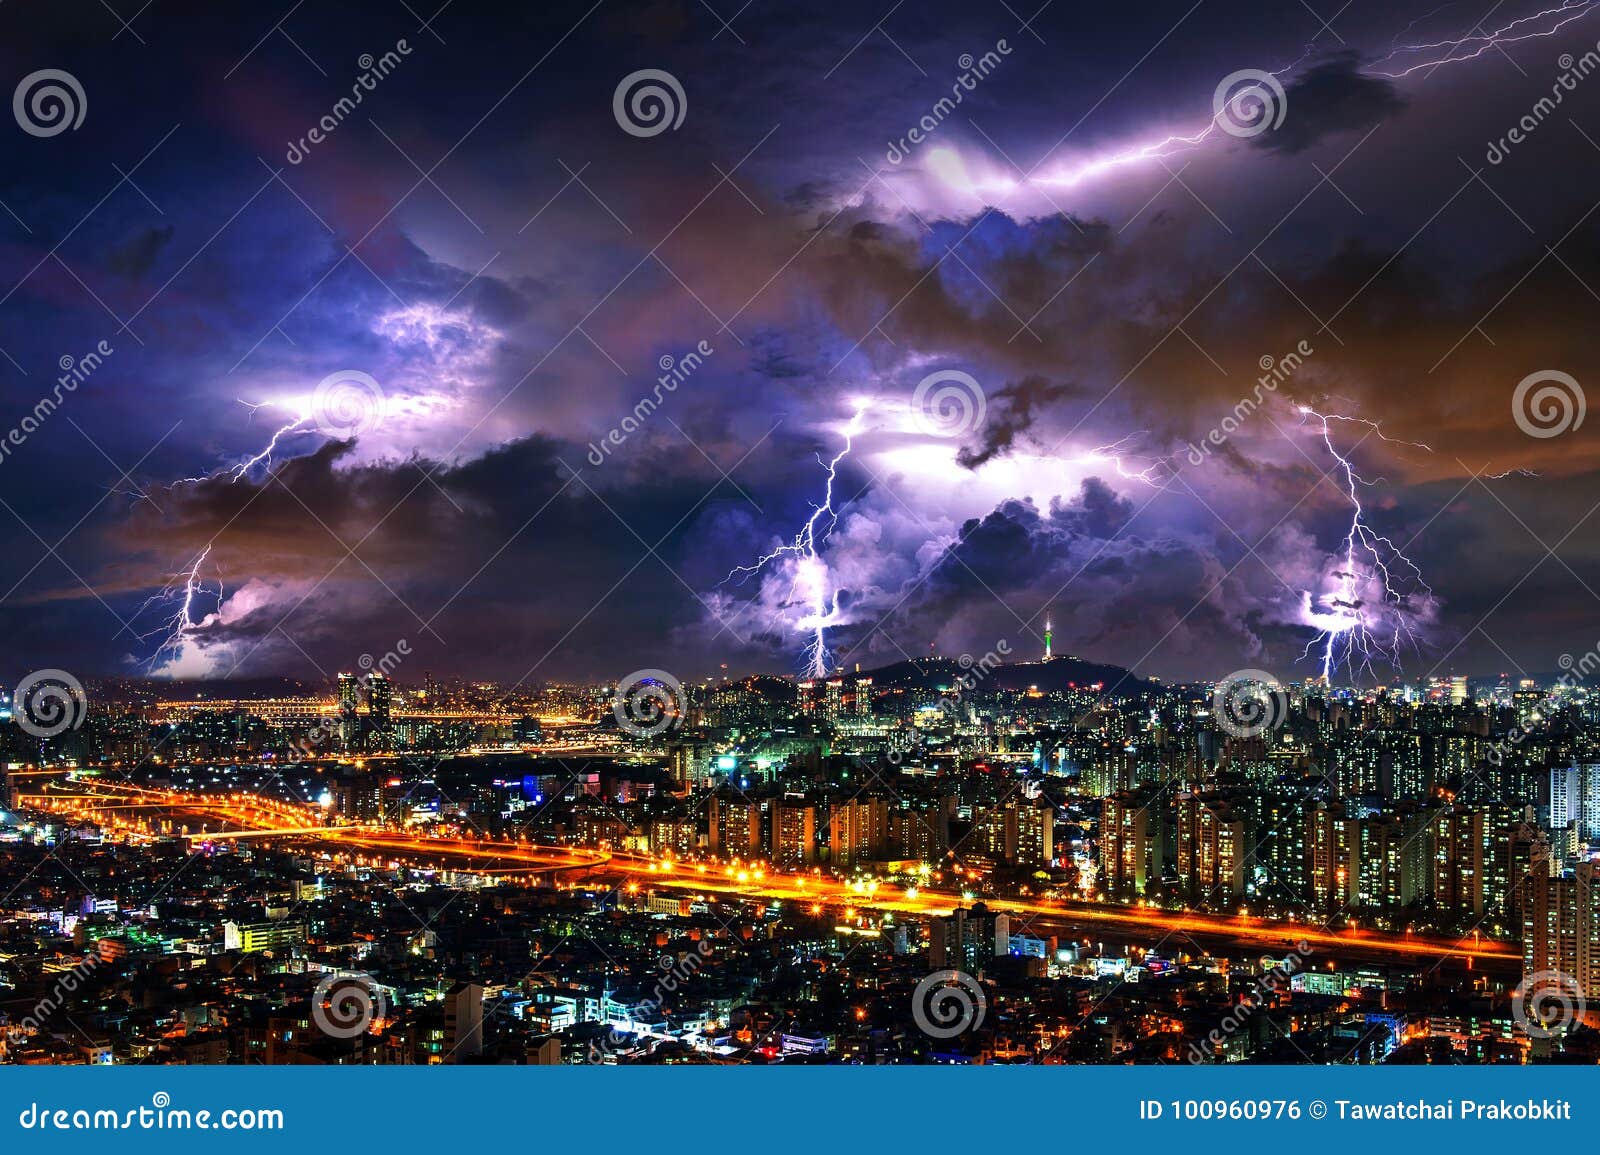 thunderstorm clouds with lightning at night in seoul, south korea